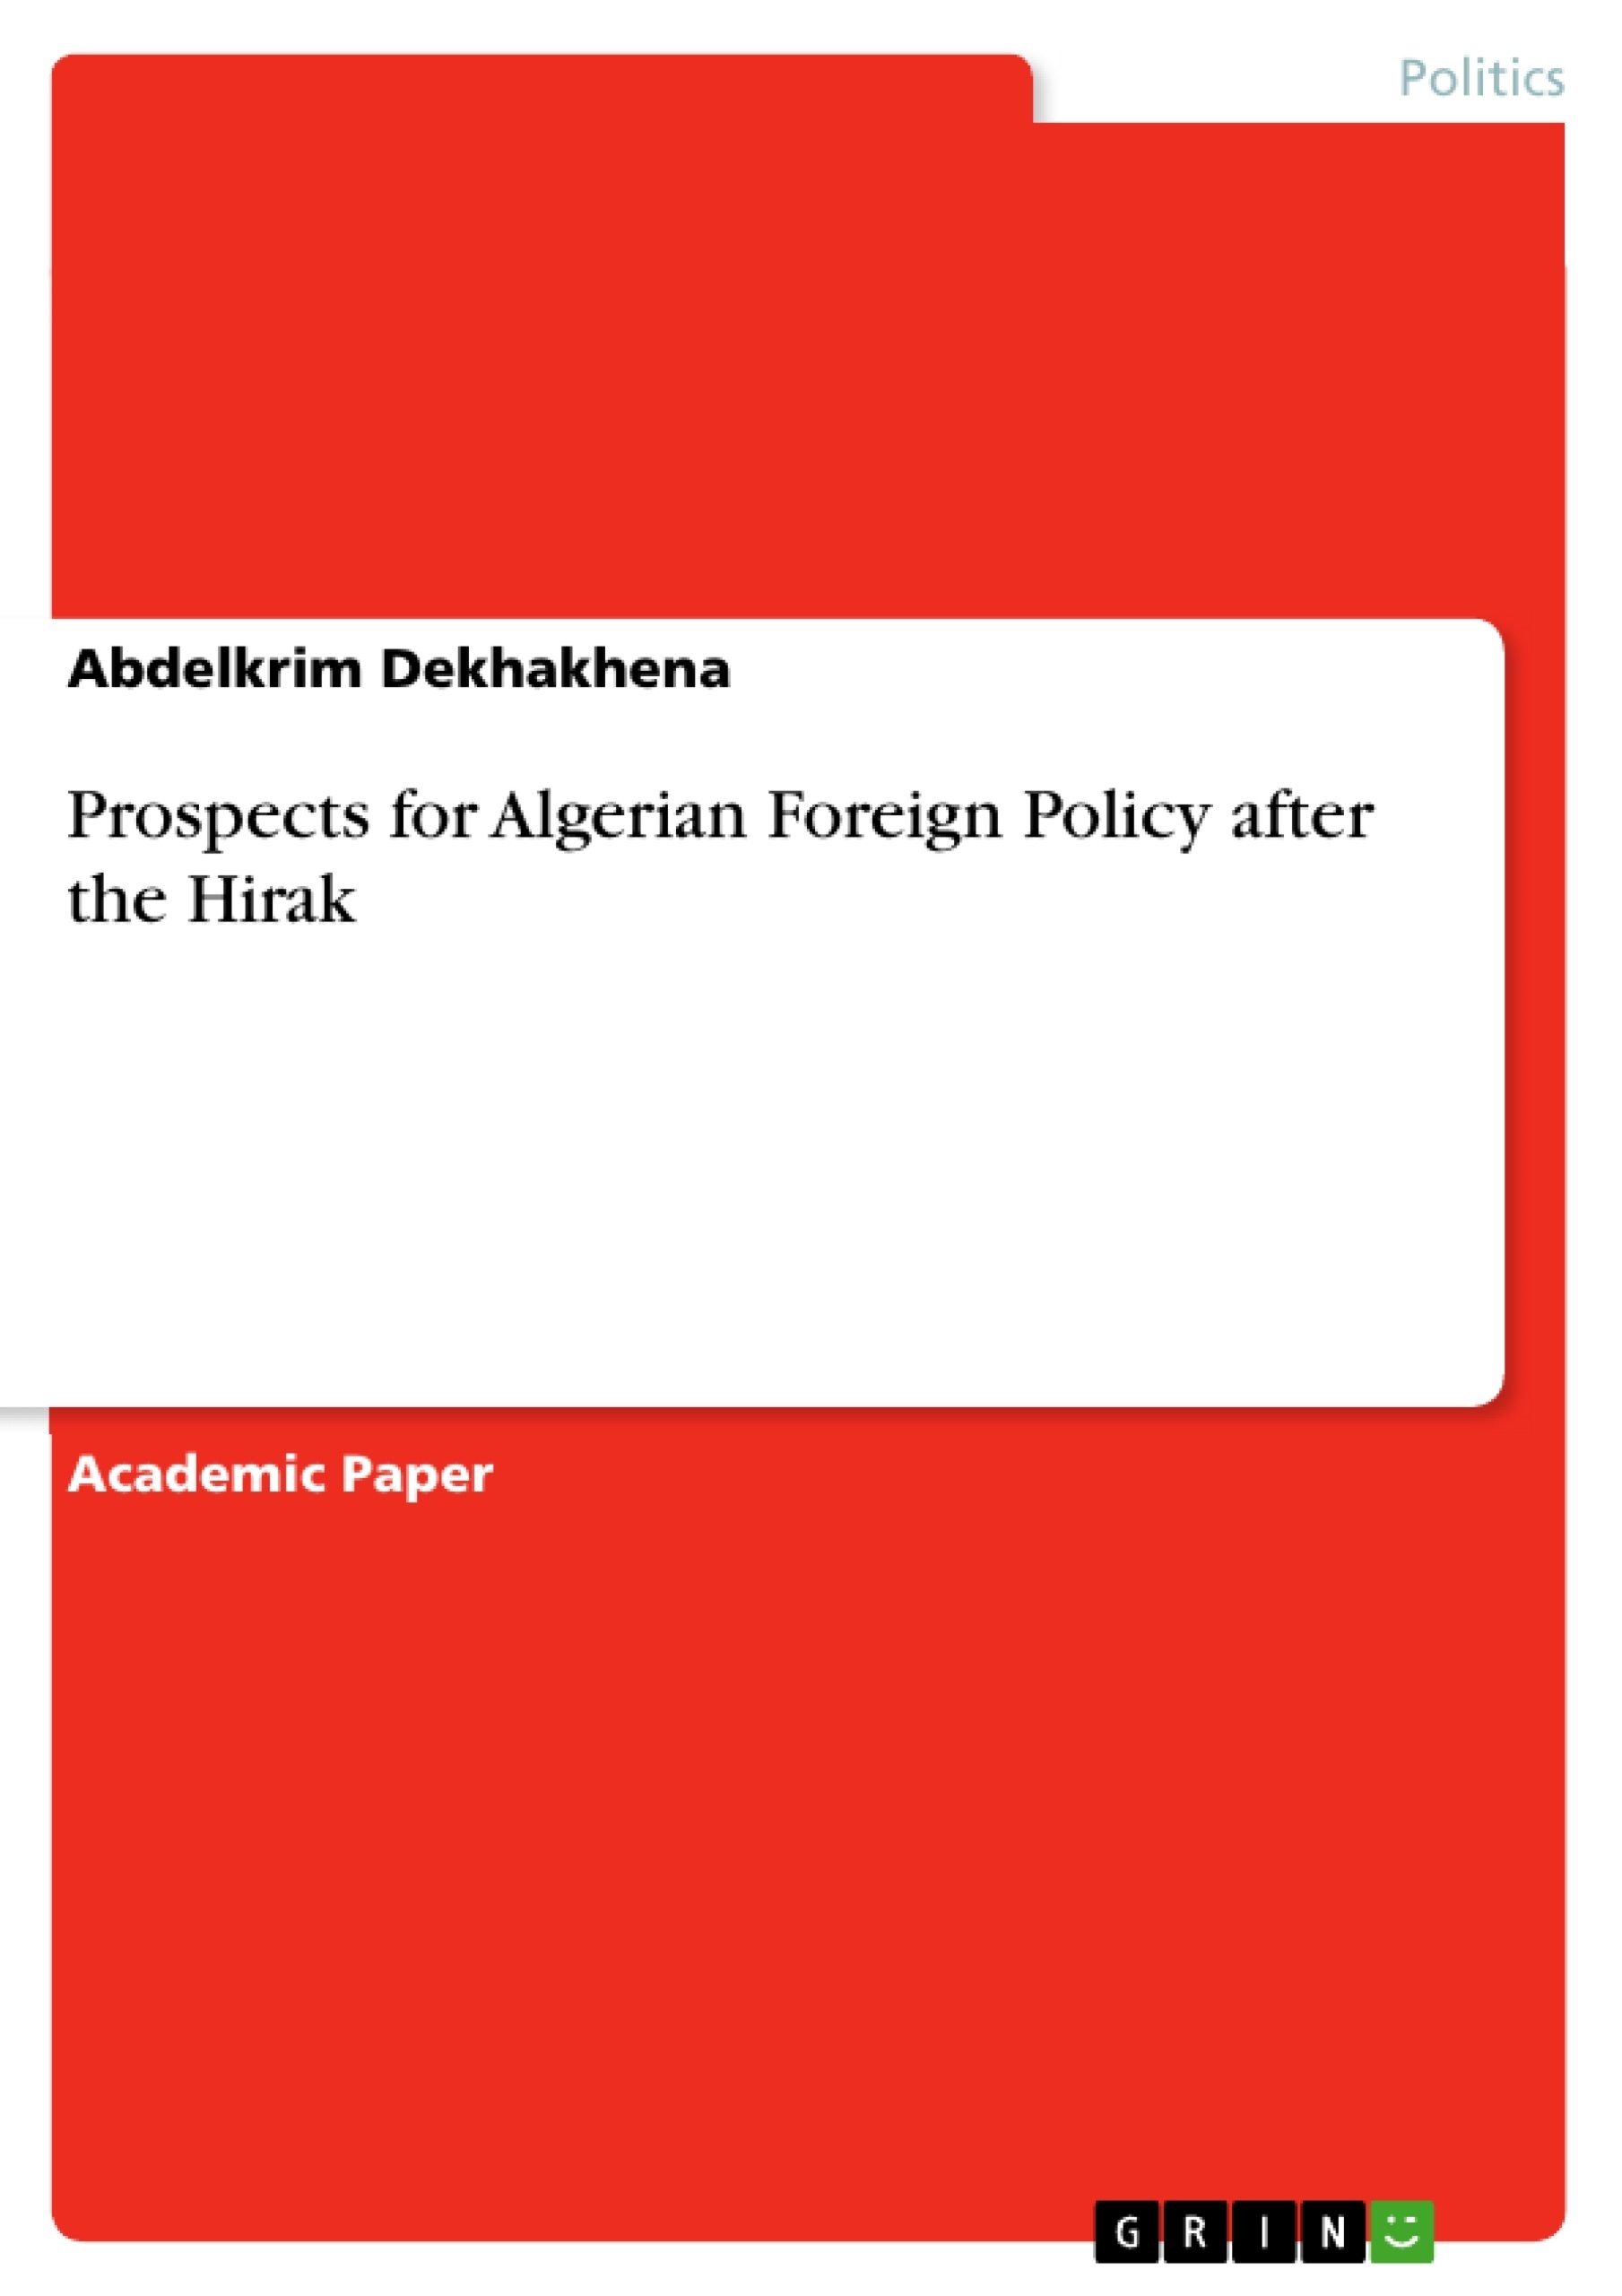 Title: Prospects for Algerian Foreign Policy after the Hirak